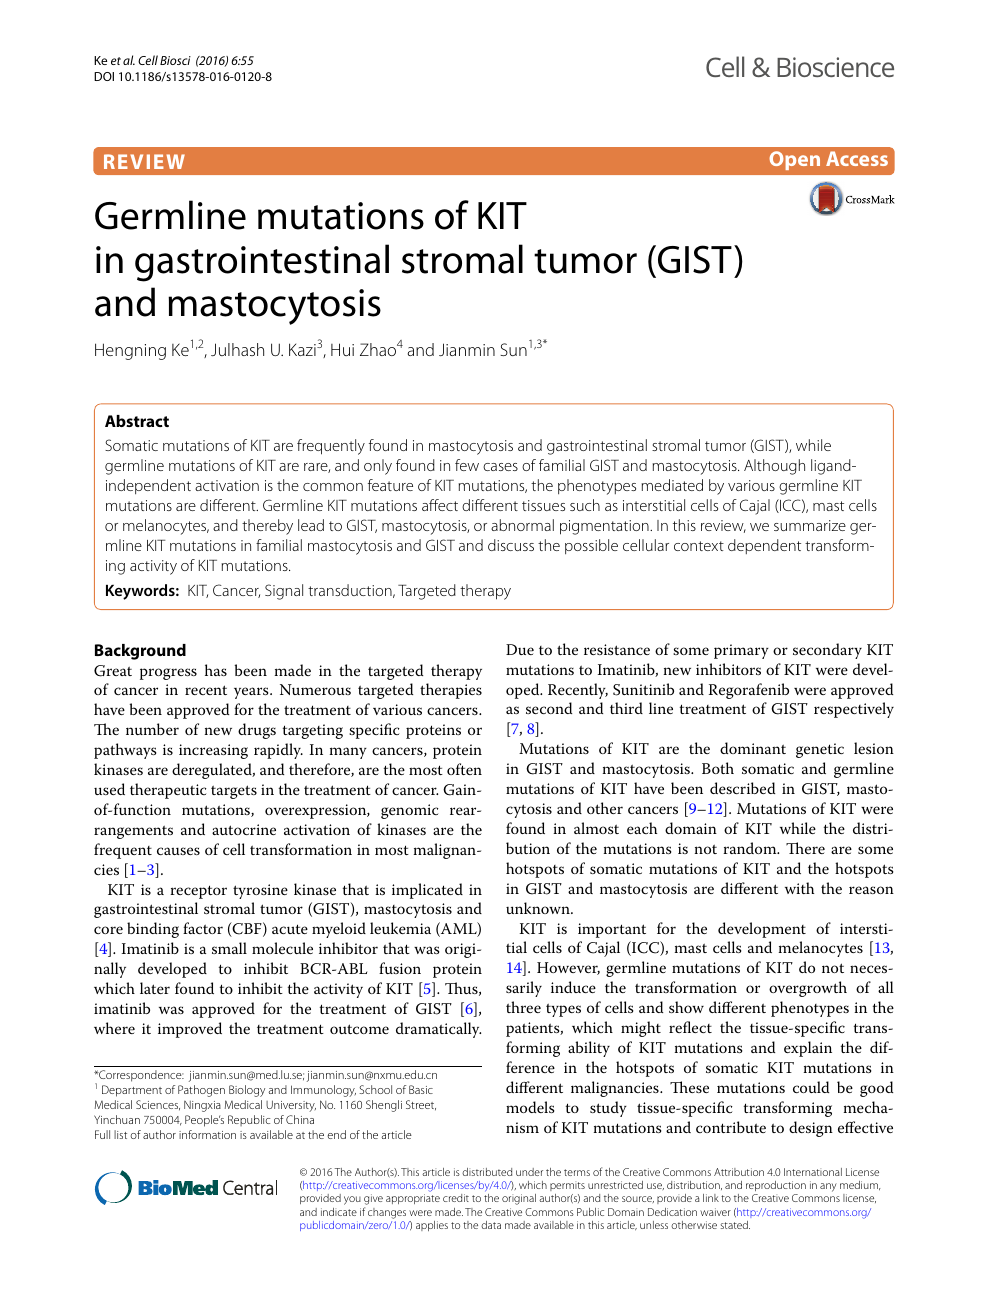 Germline Mutations Of Kit In Gastrointestinal Stromal Tumor Gist And Mastocytosis Topic Of Research Paper In Biological Sciences Download Scholarly Article Pdf And Read For Free On Cyberleninka Open Science Hub